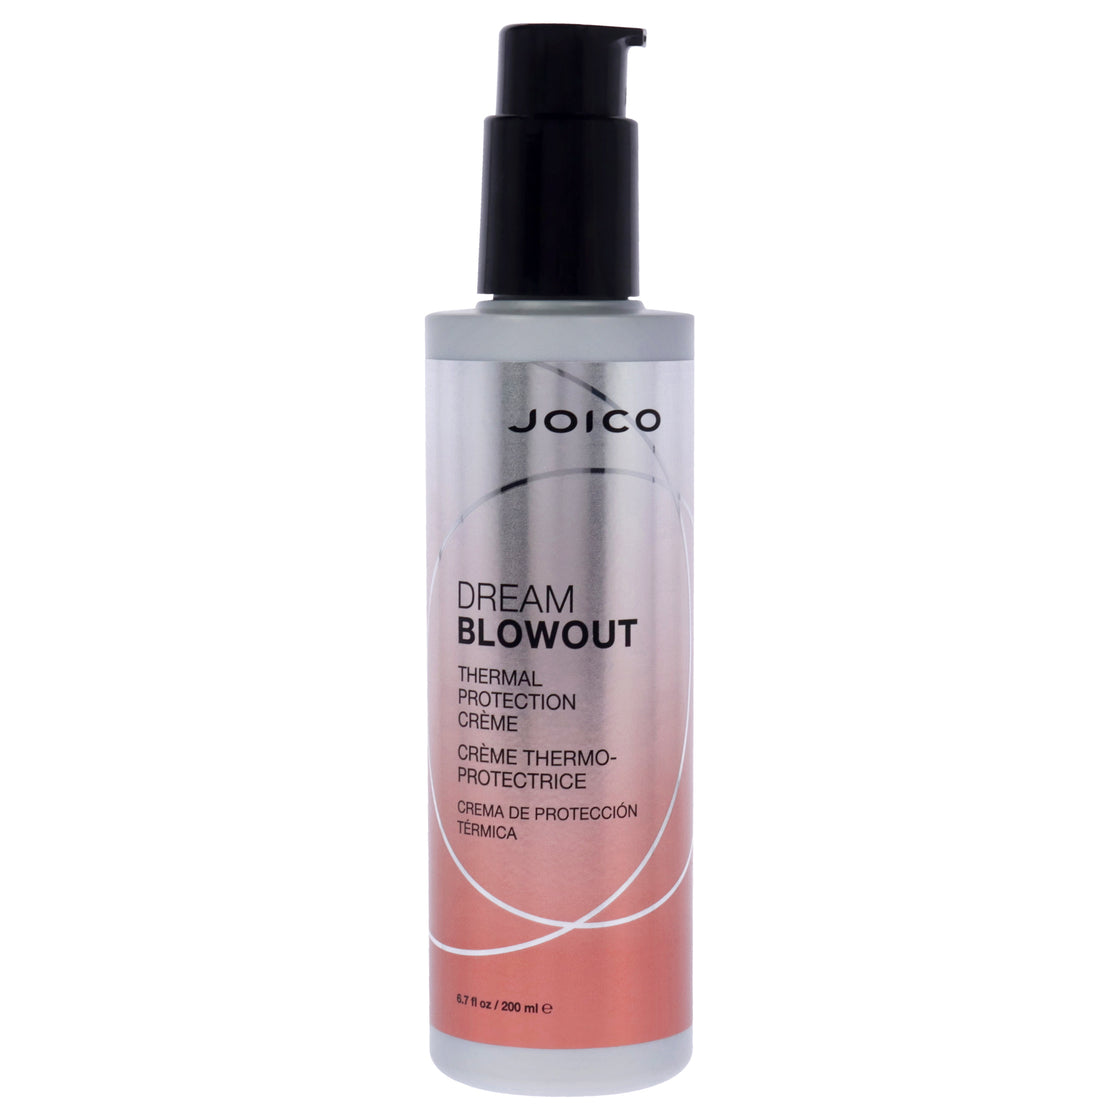 Dream Blowout Thermal Protection Creme by Joico for Unisex - 6.7 oz Cream